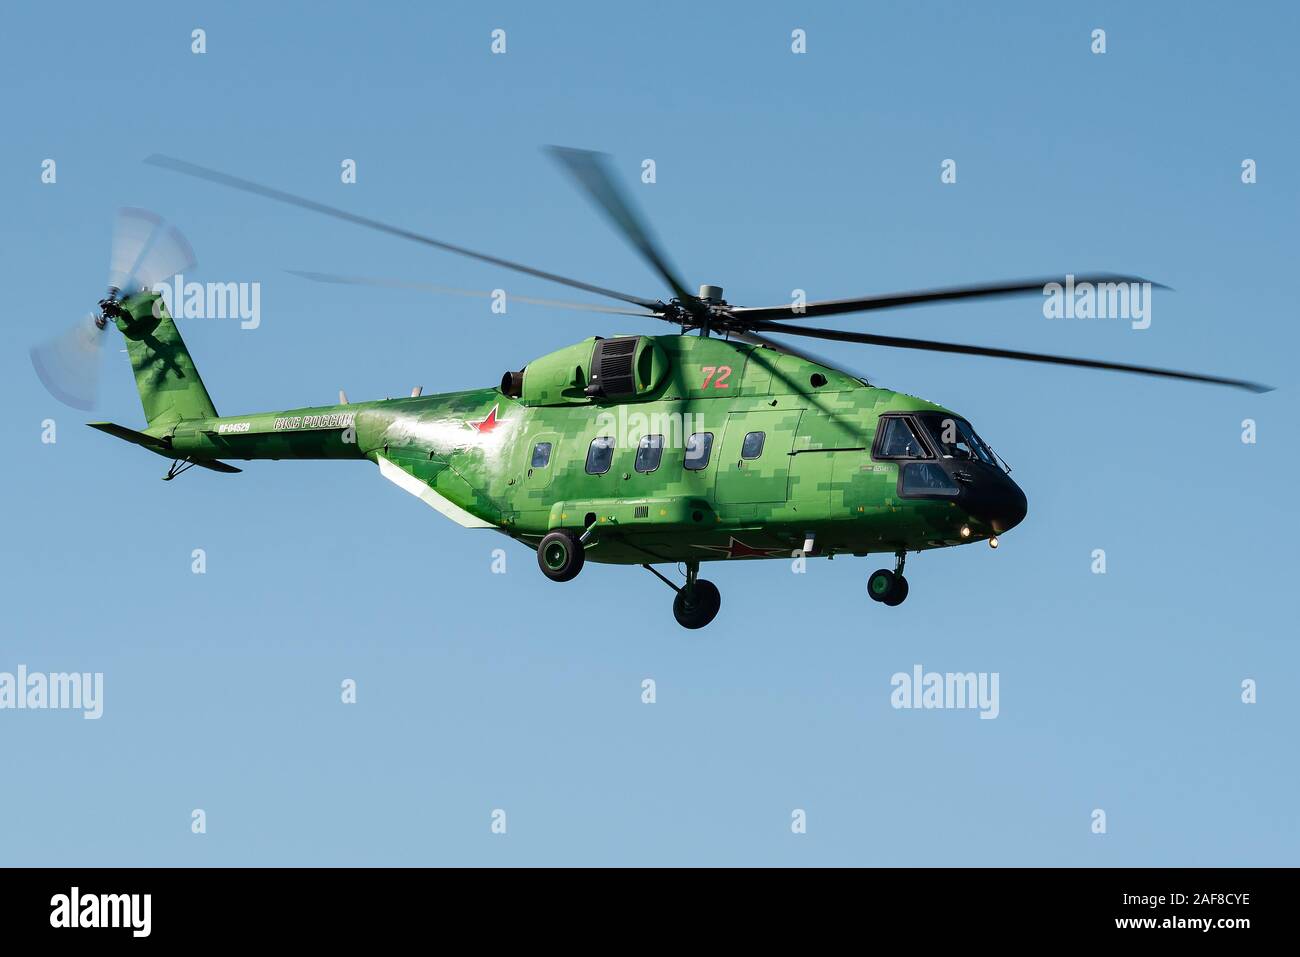 The Mil Mi-38 is a transport helicopter designed by Mil Moscow Helicopter Plant and being developed by Kazan Helicopters. Stock Photo